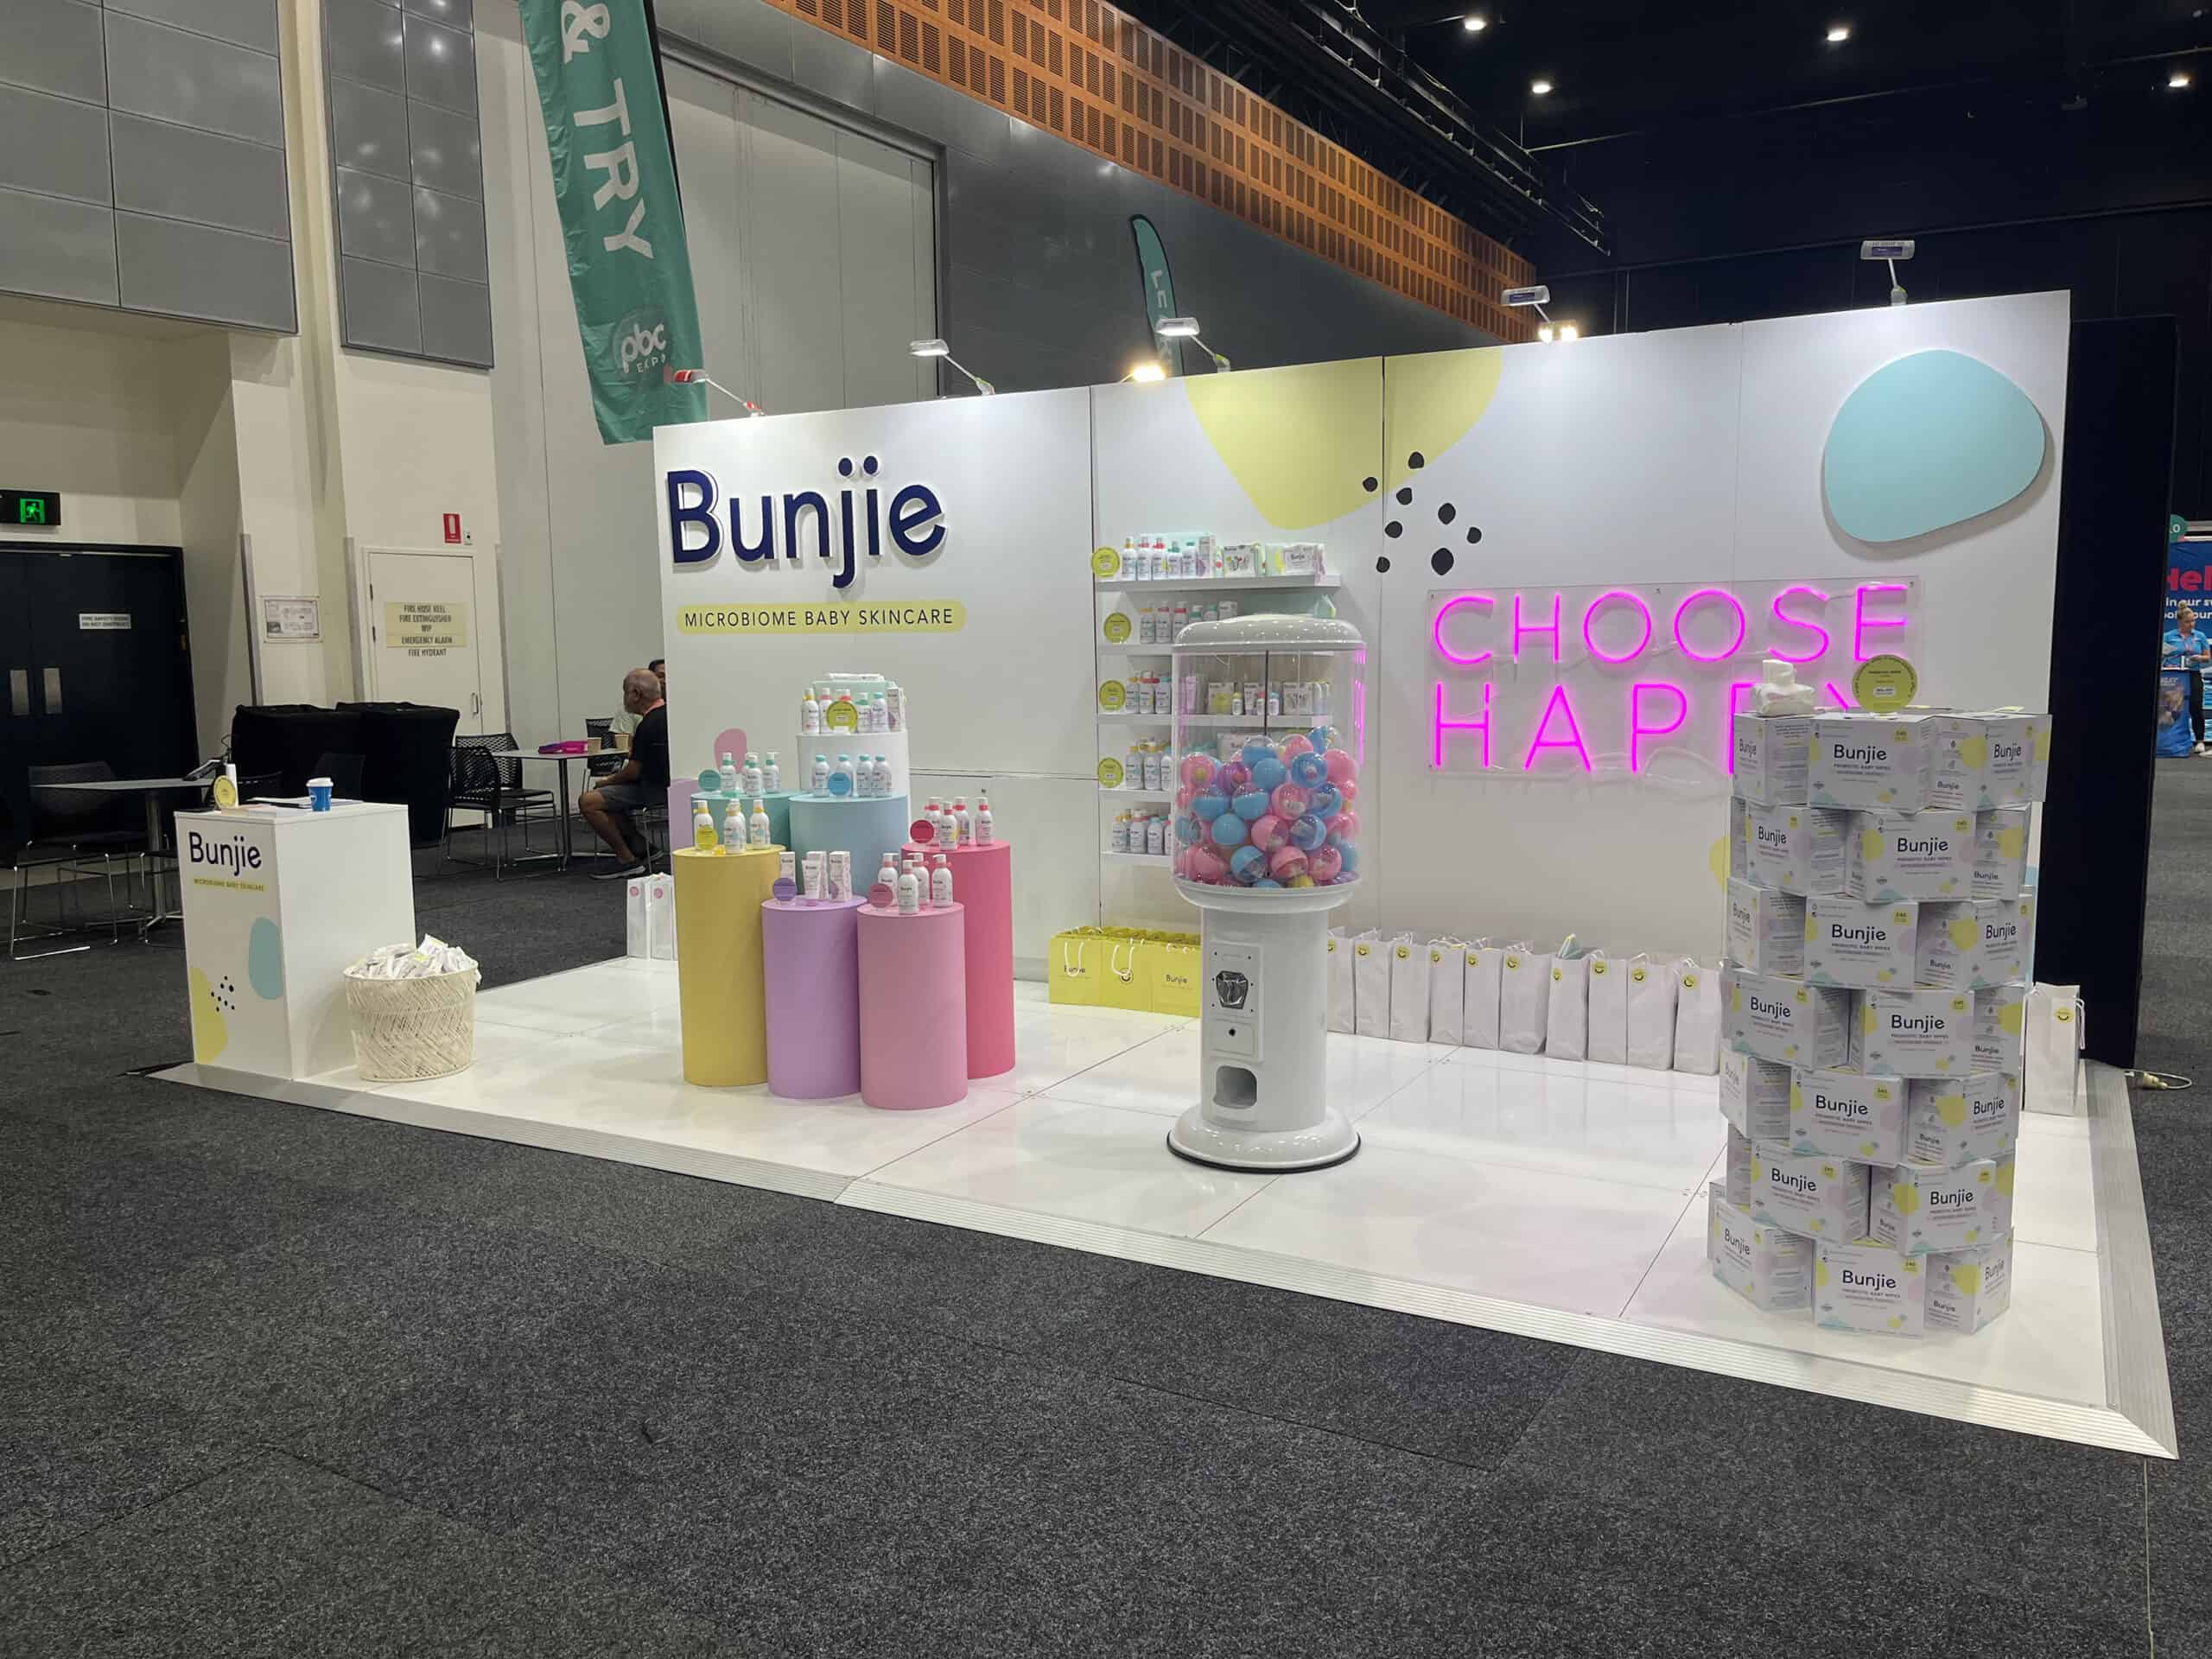 expo booth design idea for bunjie by select exhibitions